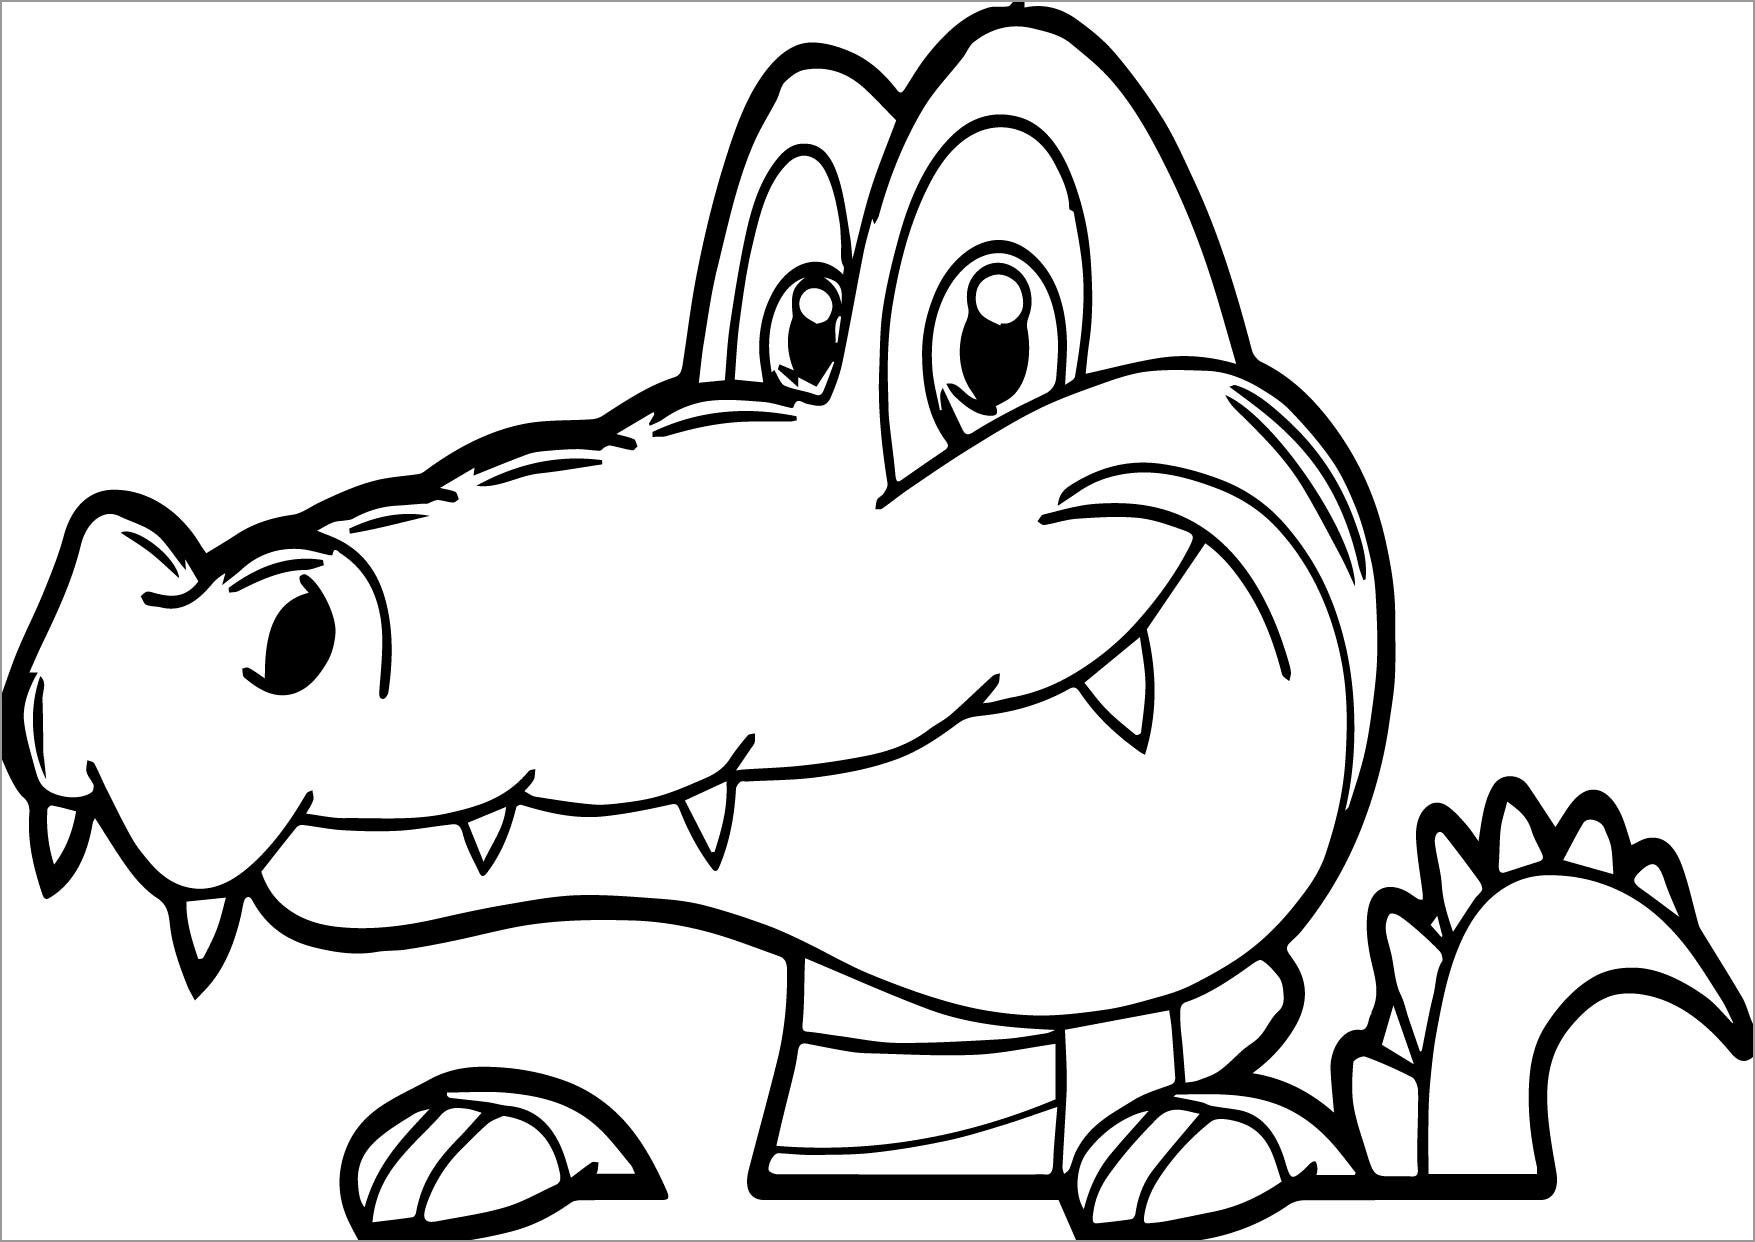 Crocodile Coloring Pages - ColoringBay